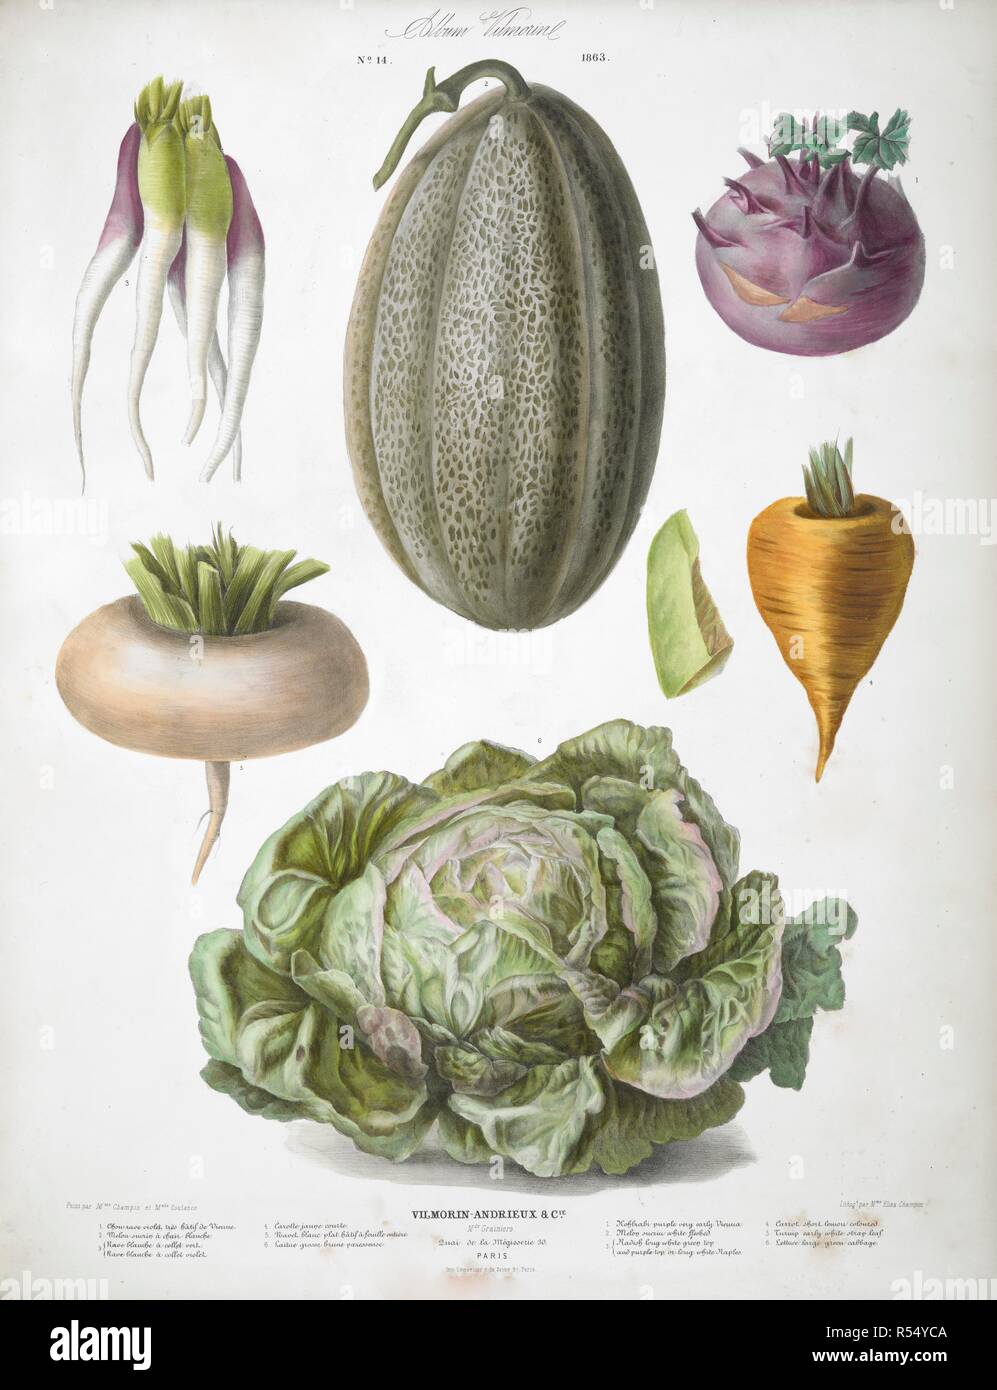 Various Vegetables, including turnips, radish, cabbage and squash. Album Vilmorin. [68 Coloured plates of vegetables and flowers, printed by E. Champin and Mlle. Coutance.]. Paris, [1850]. Source: N.Tab.2004/k. plate 14. Author: de Vilmorin, Pierre LÃ©vÃªque. Stock Photo